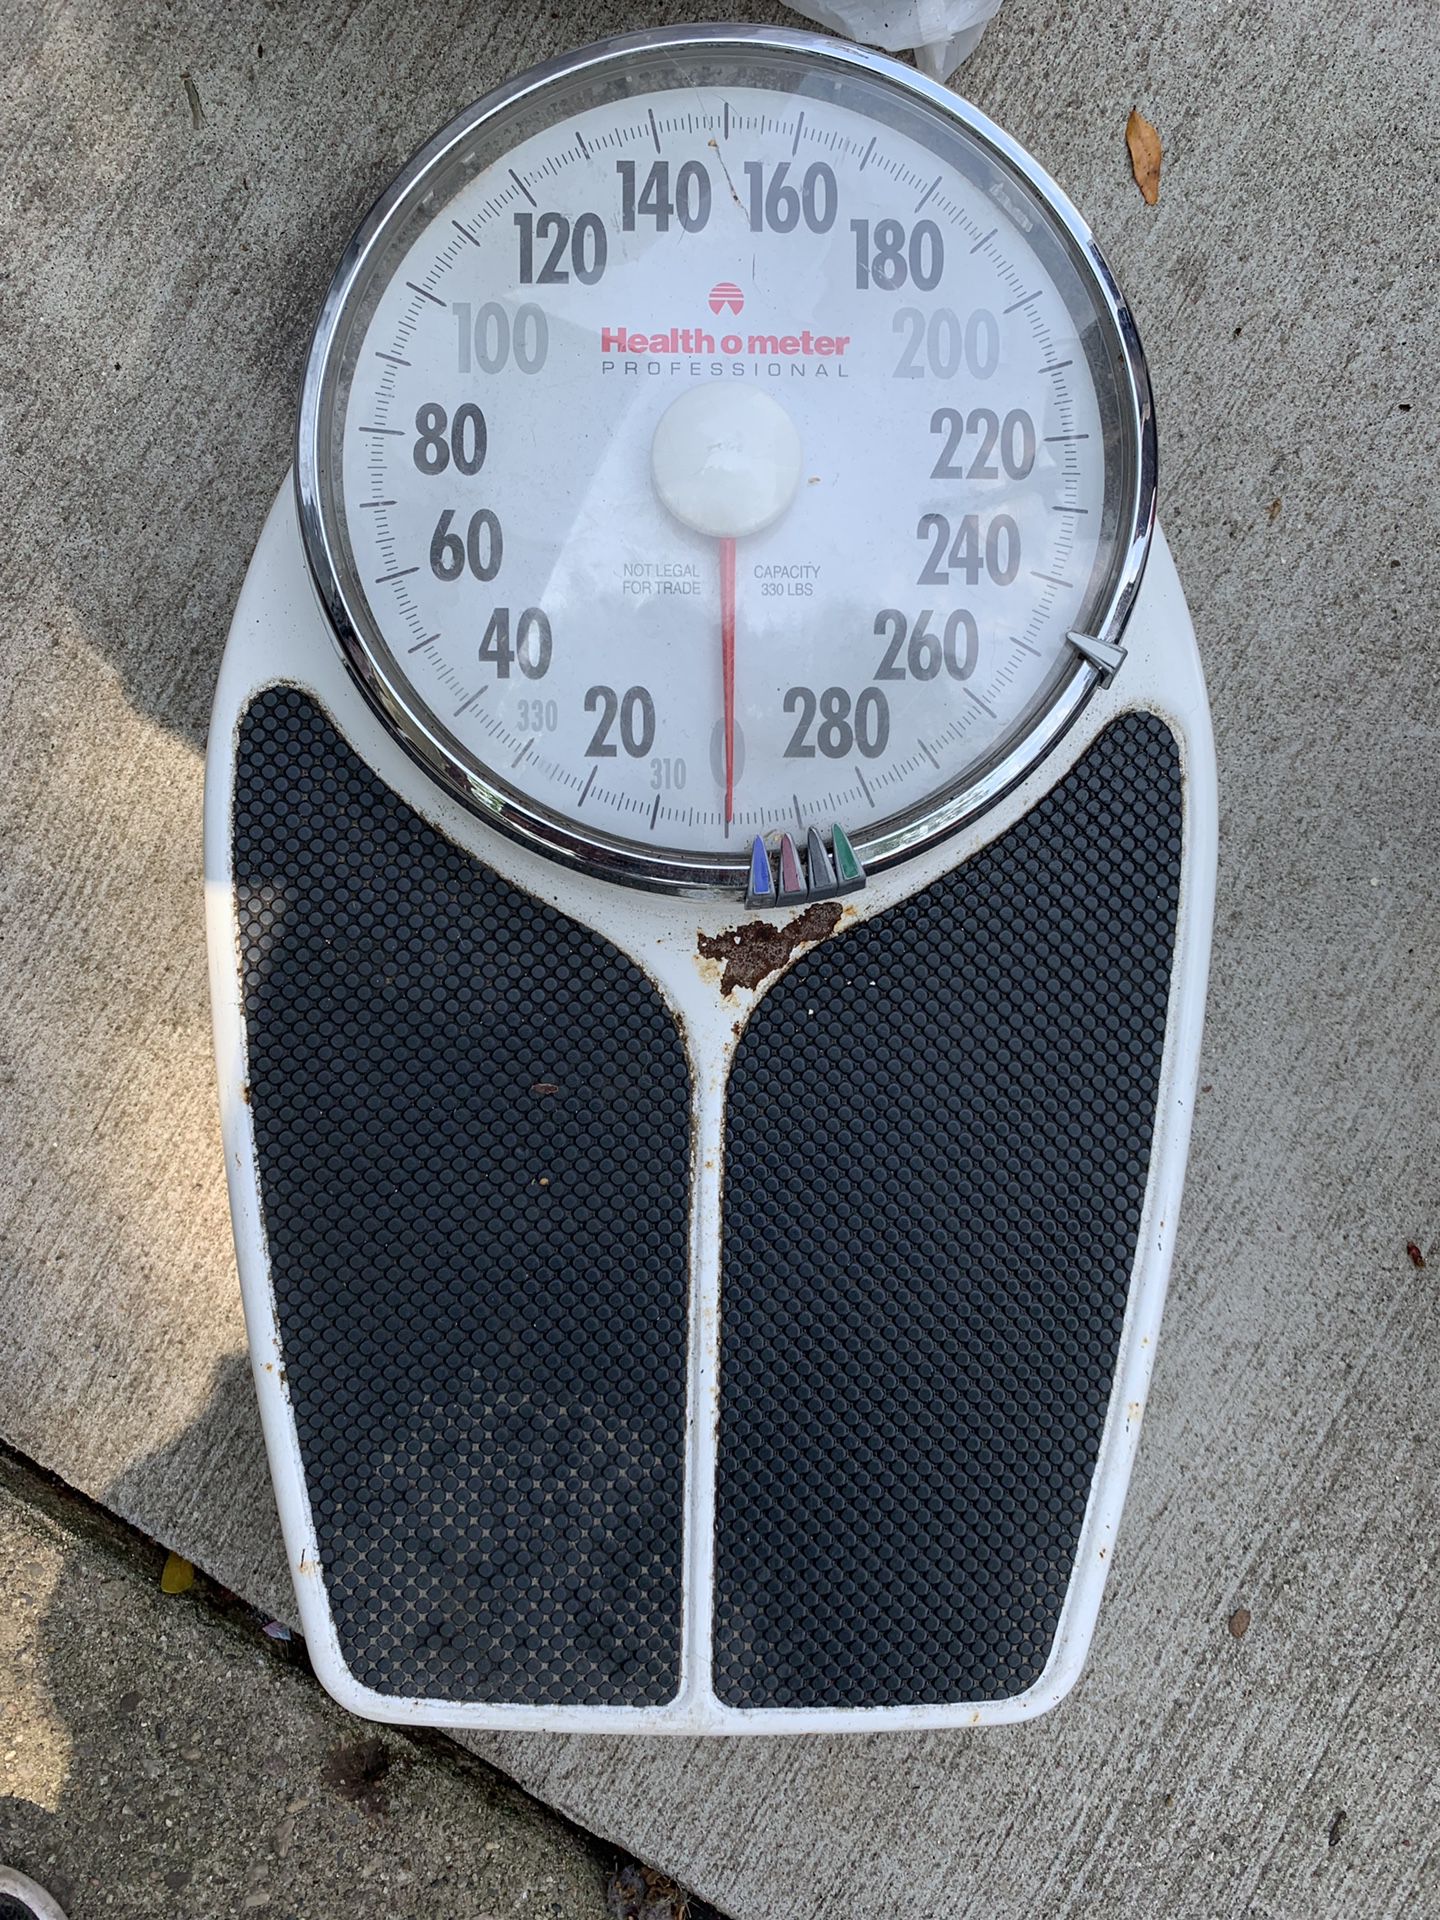 Health o meter professional scale $20